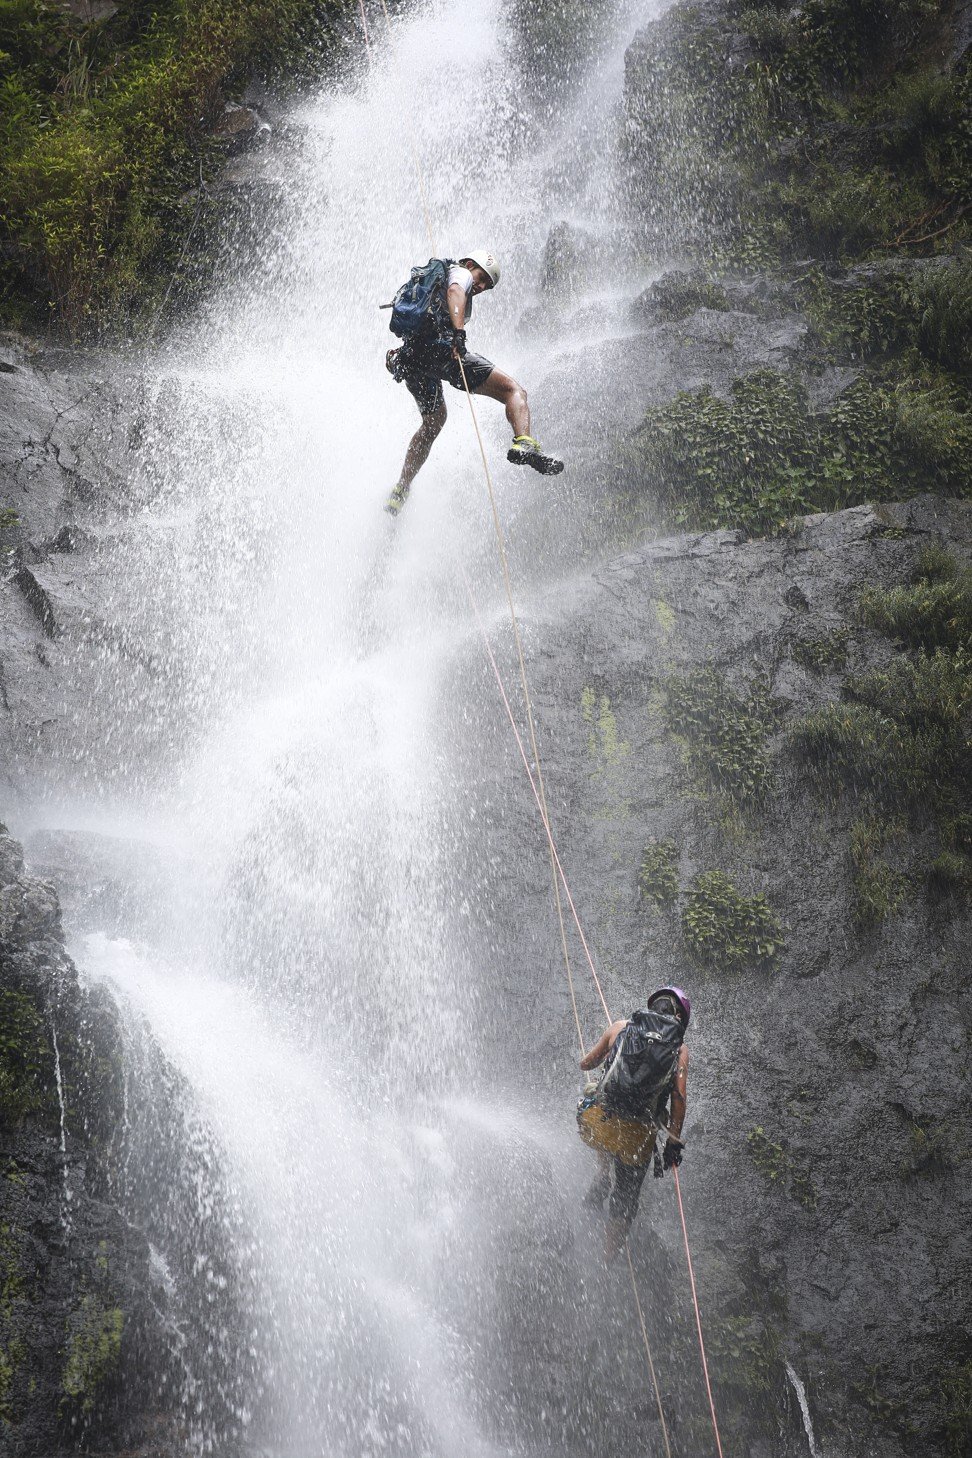 Mark Delecate (top) and his mother Janchai abseil down a waterfall in the New Territories. Photo: James Wendlinger